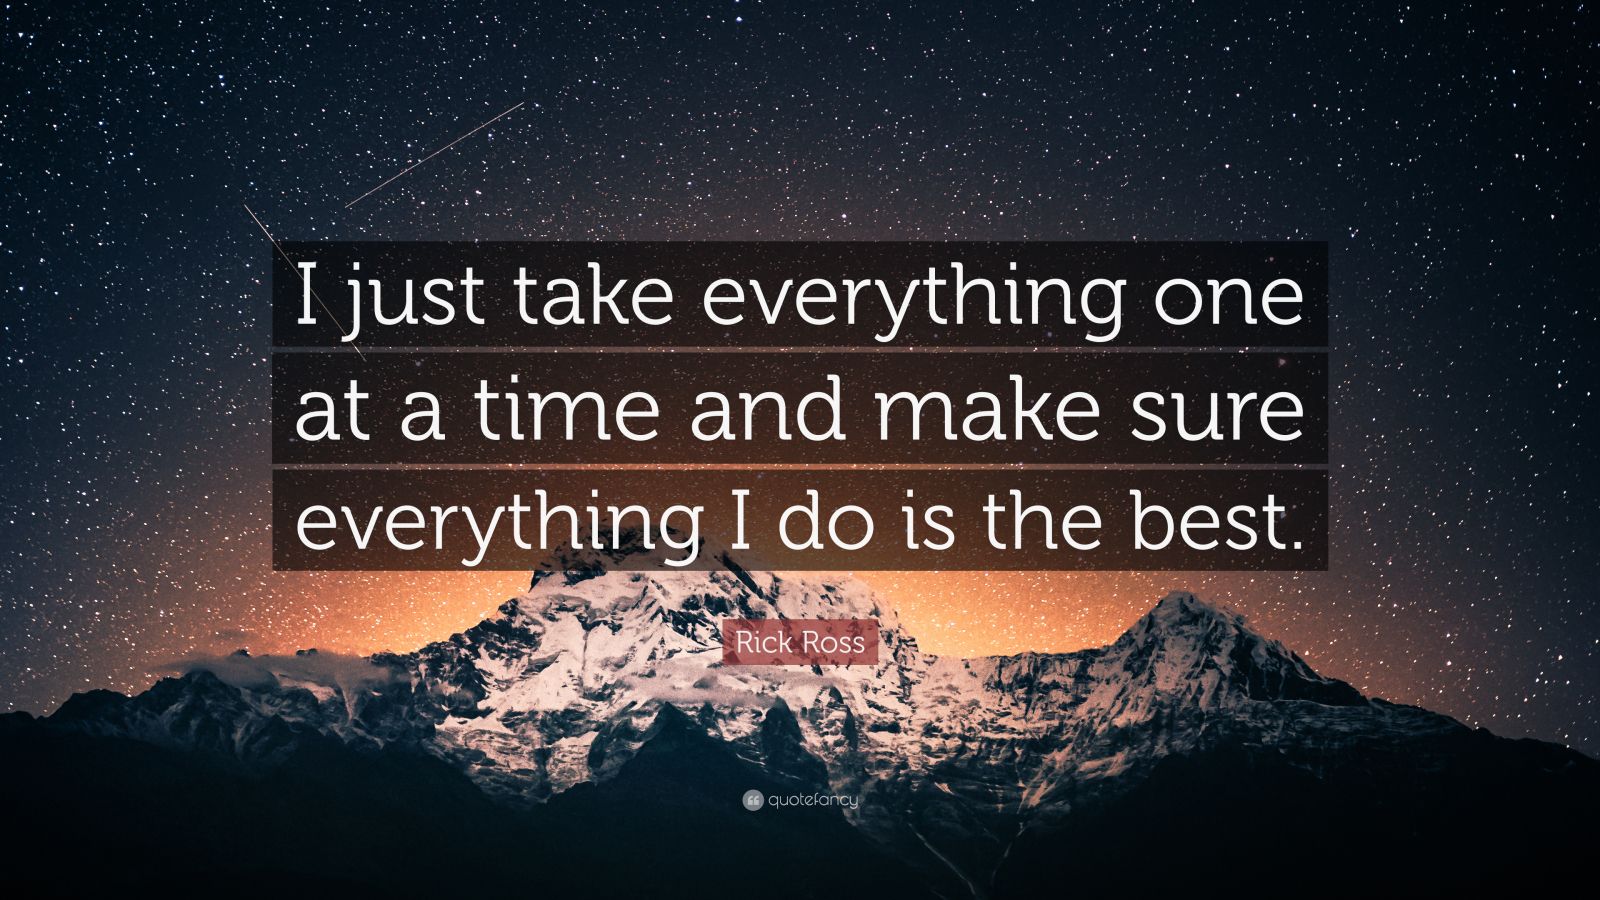 Rick Ross Quote: “I just take everything one at a time and make sure ...